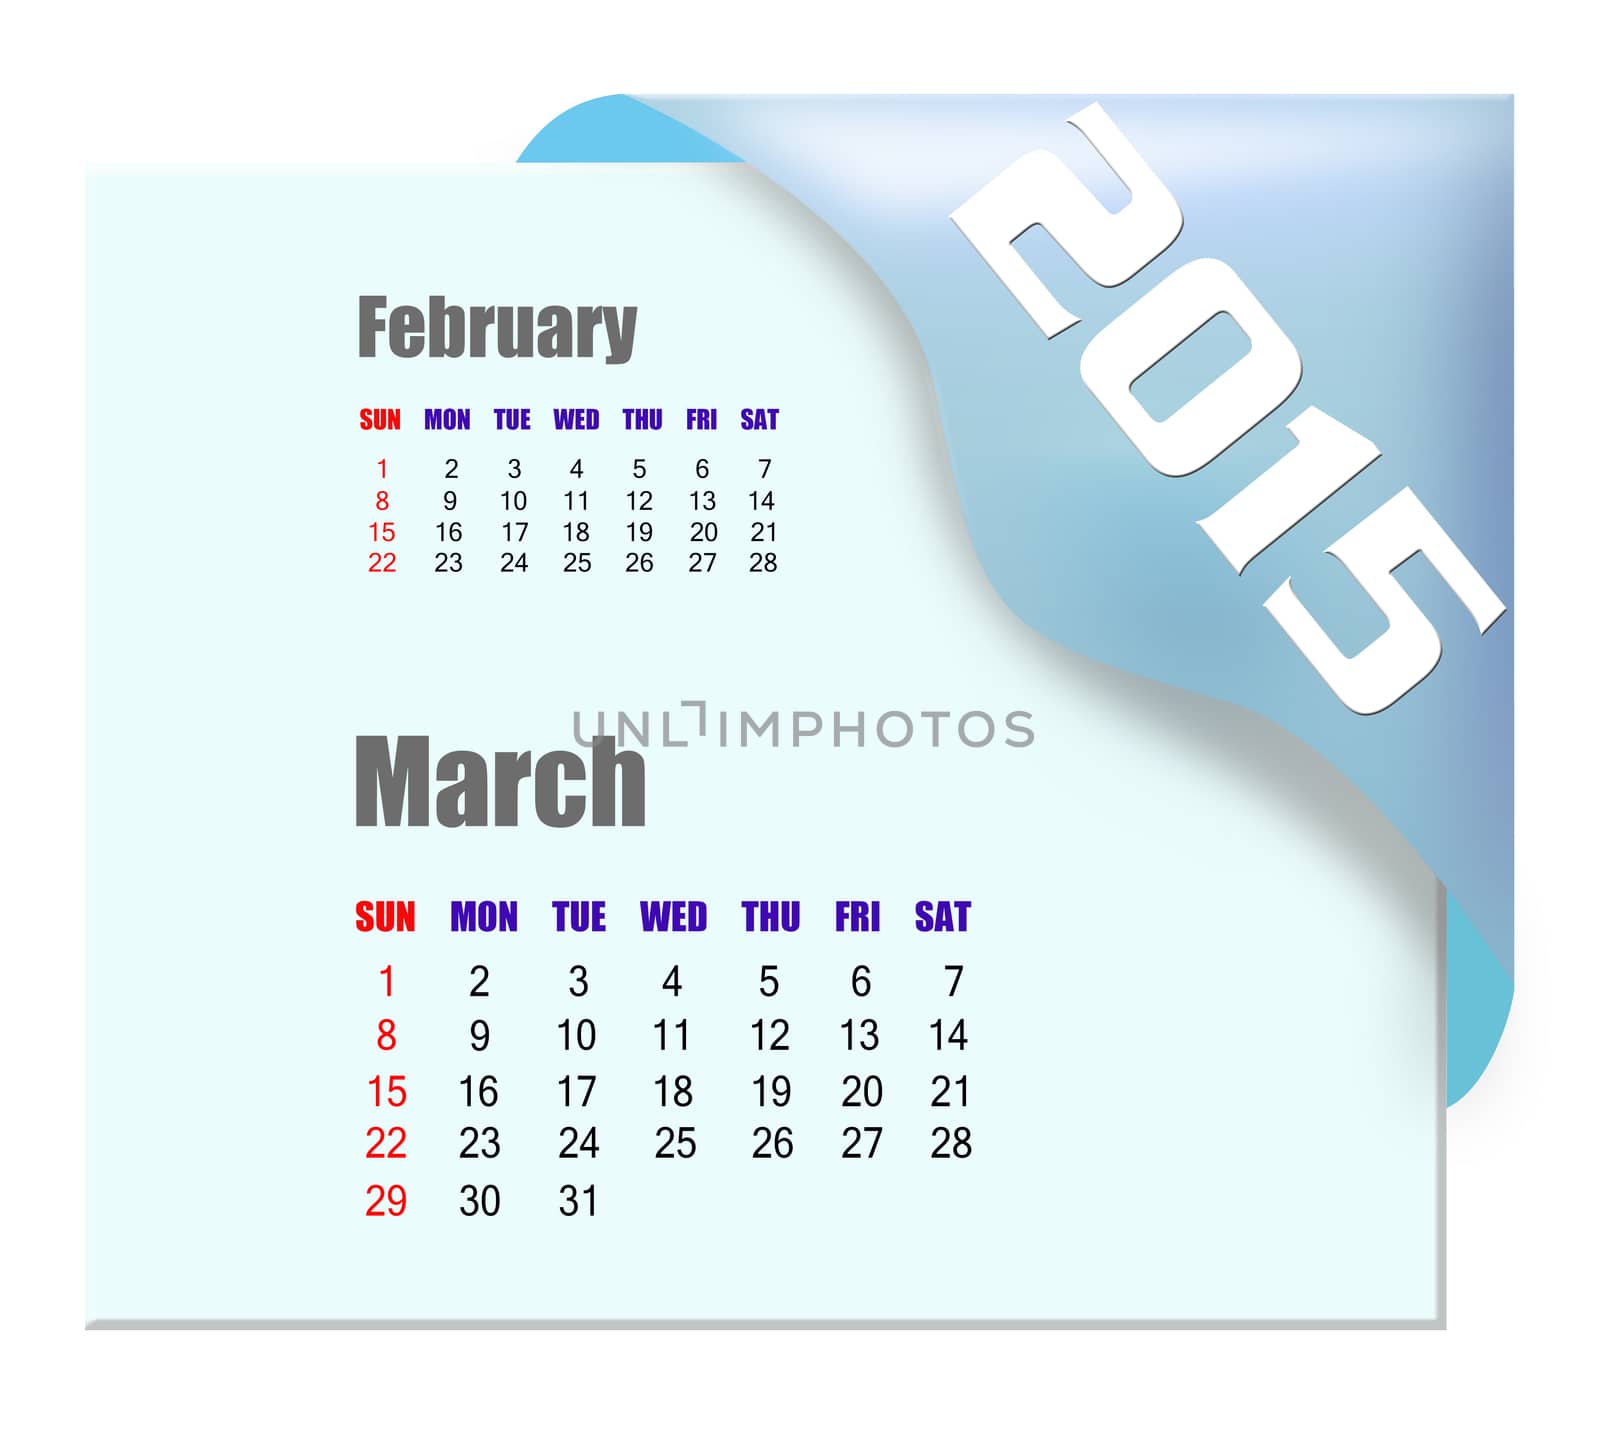 March 2015 calendar with past month series